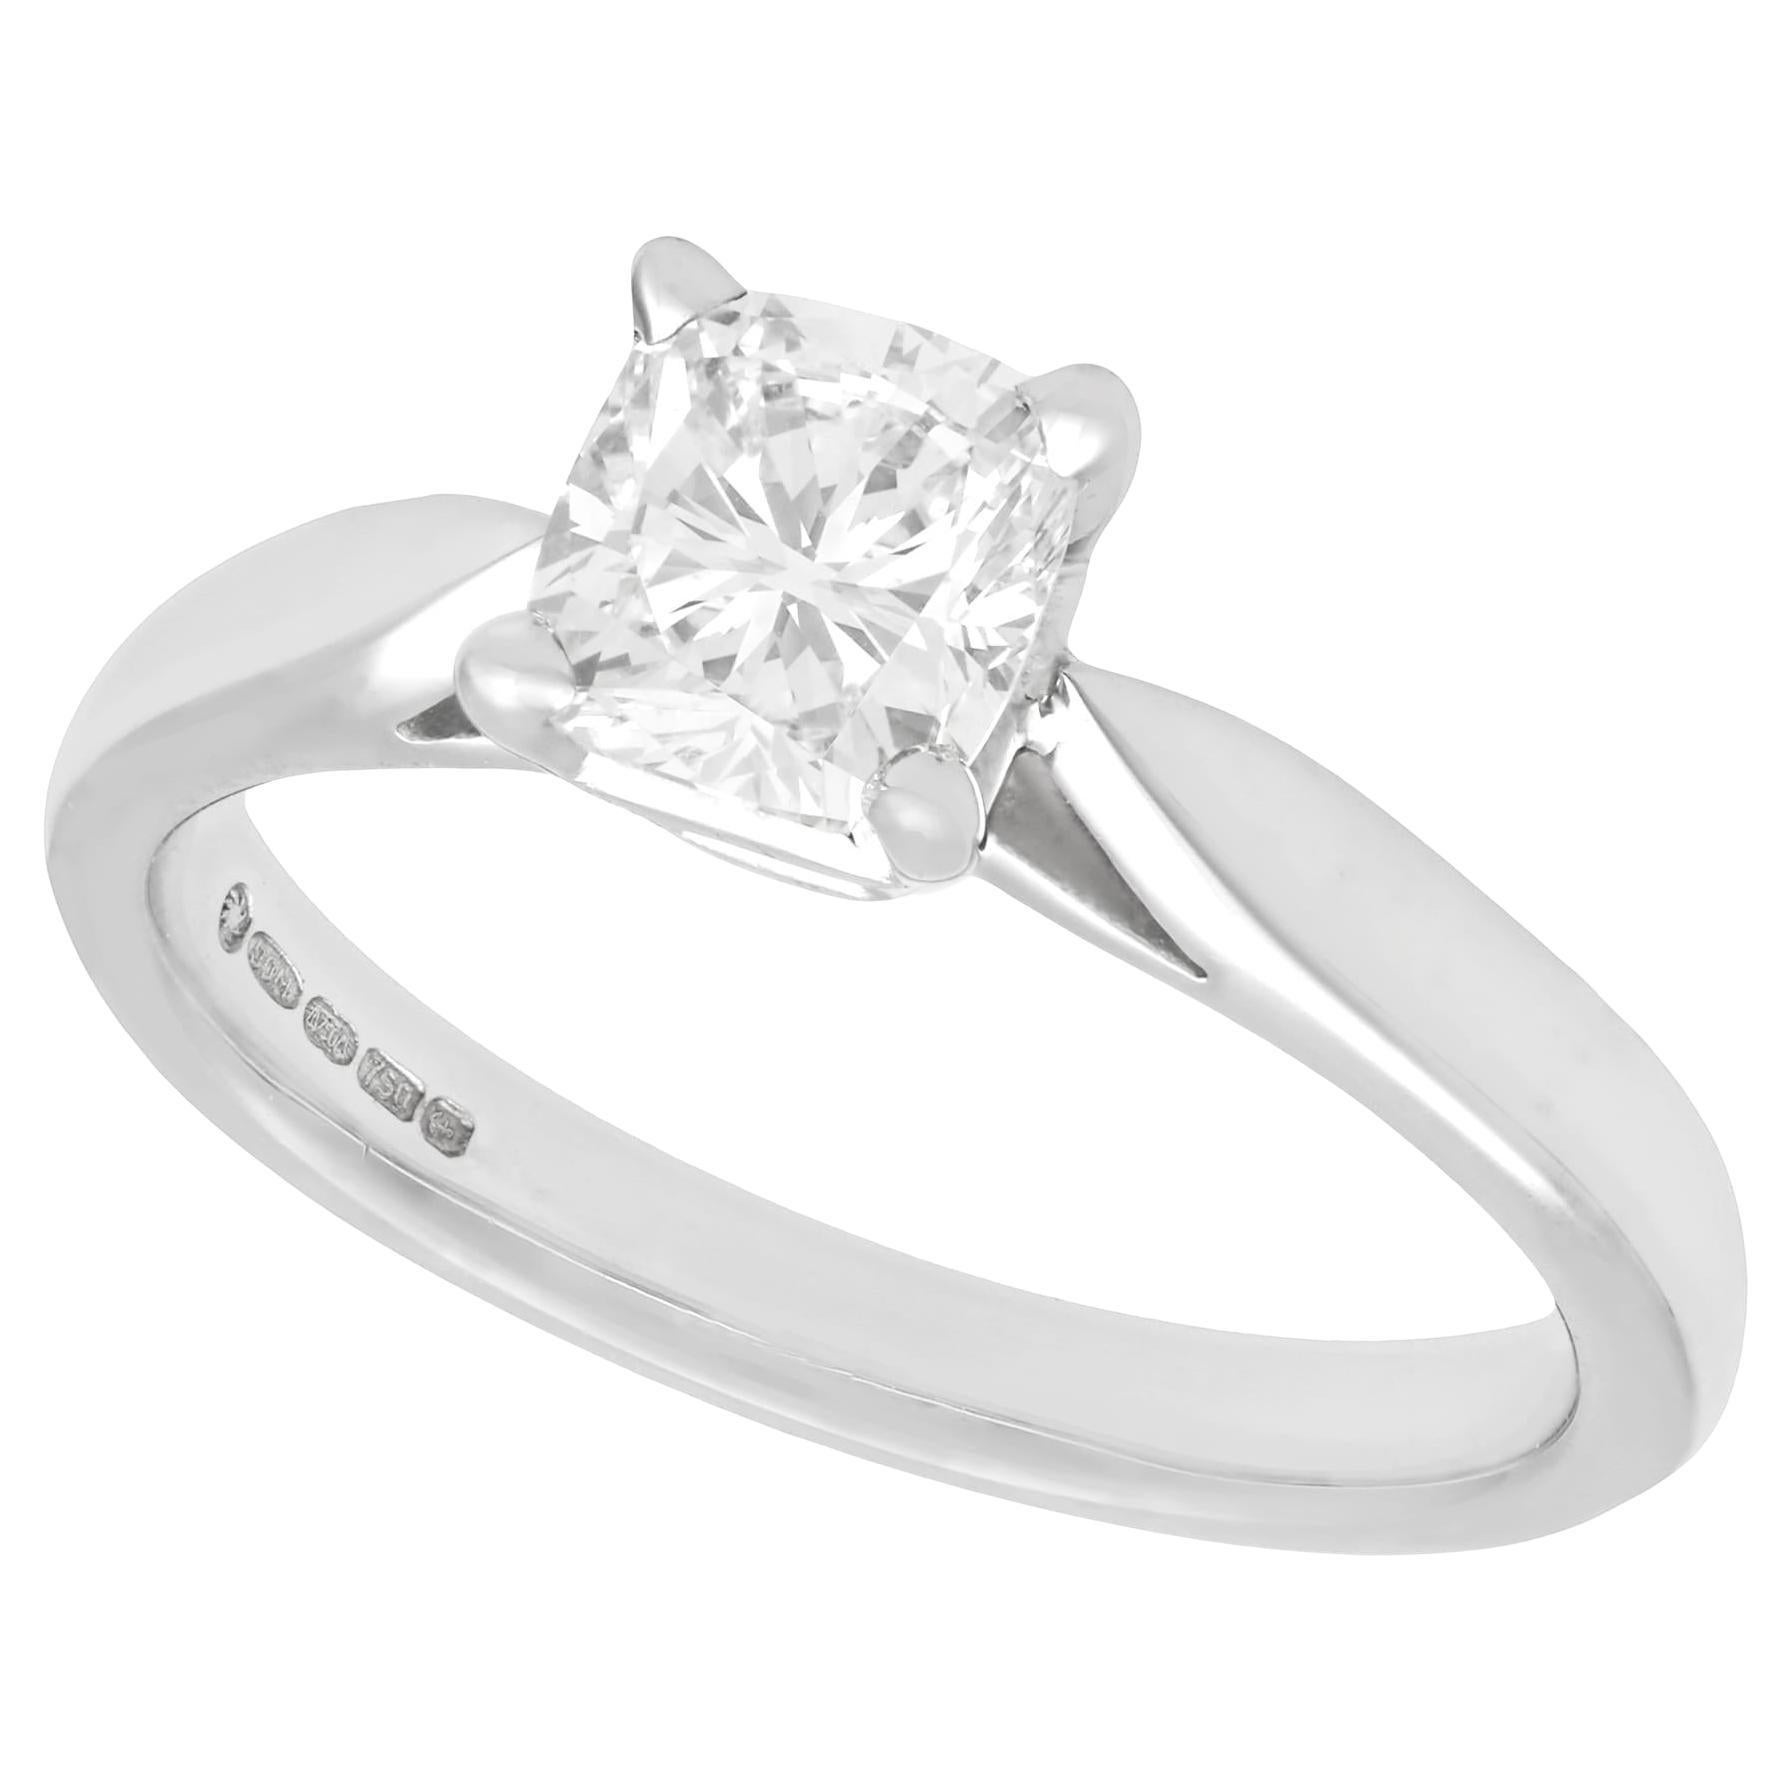 1.05 Carat Diamond and White Gold Solitaire Engagement Ring For Sale